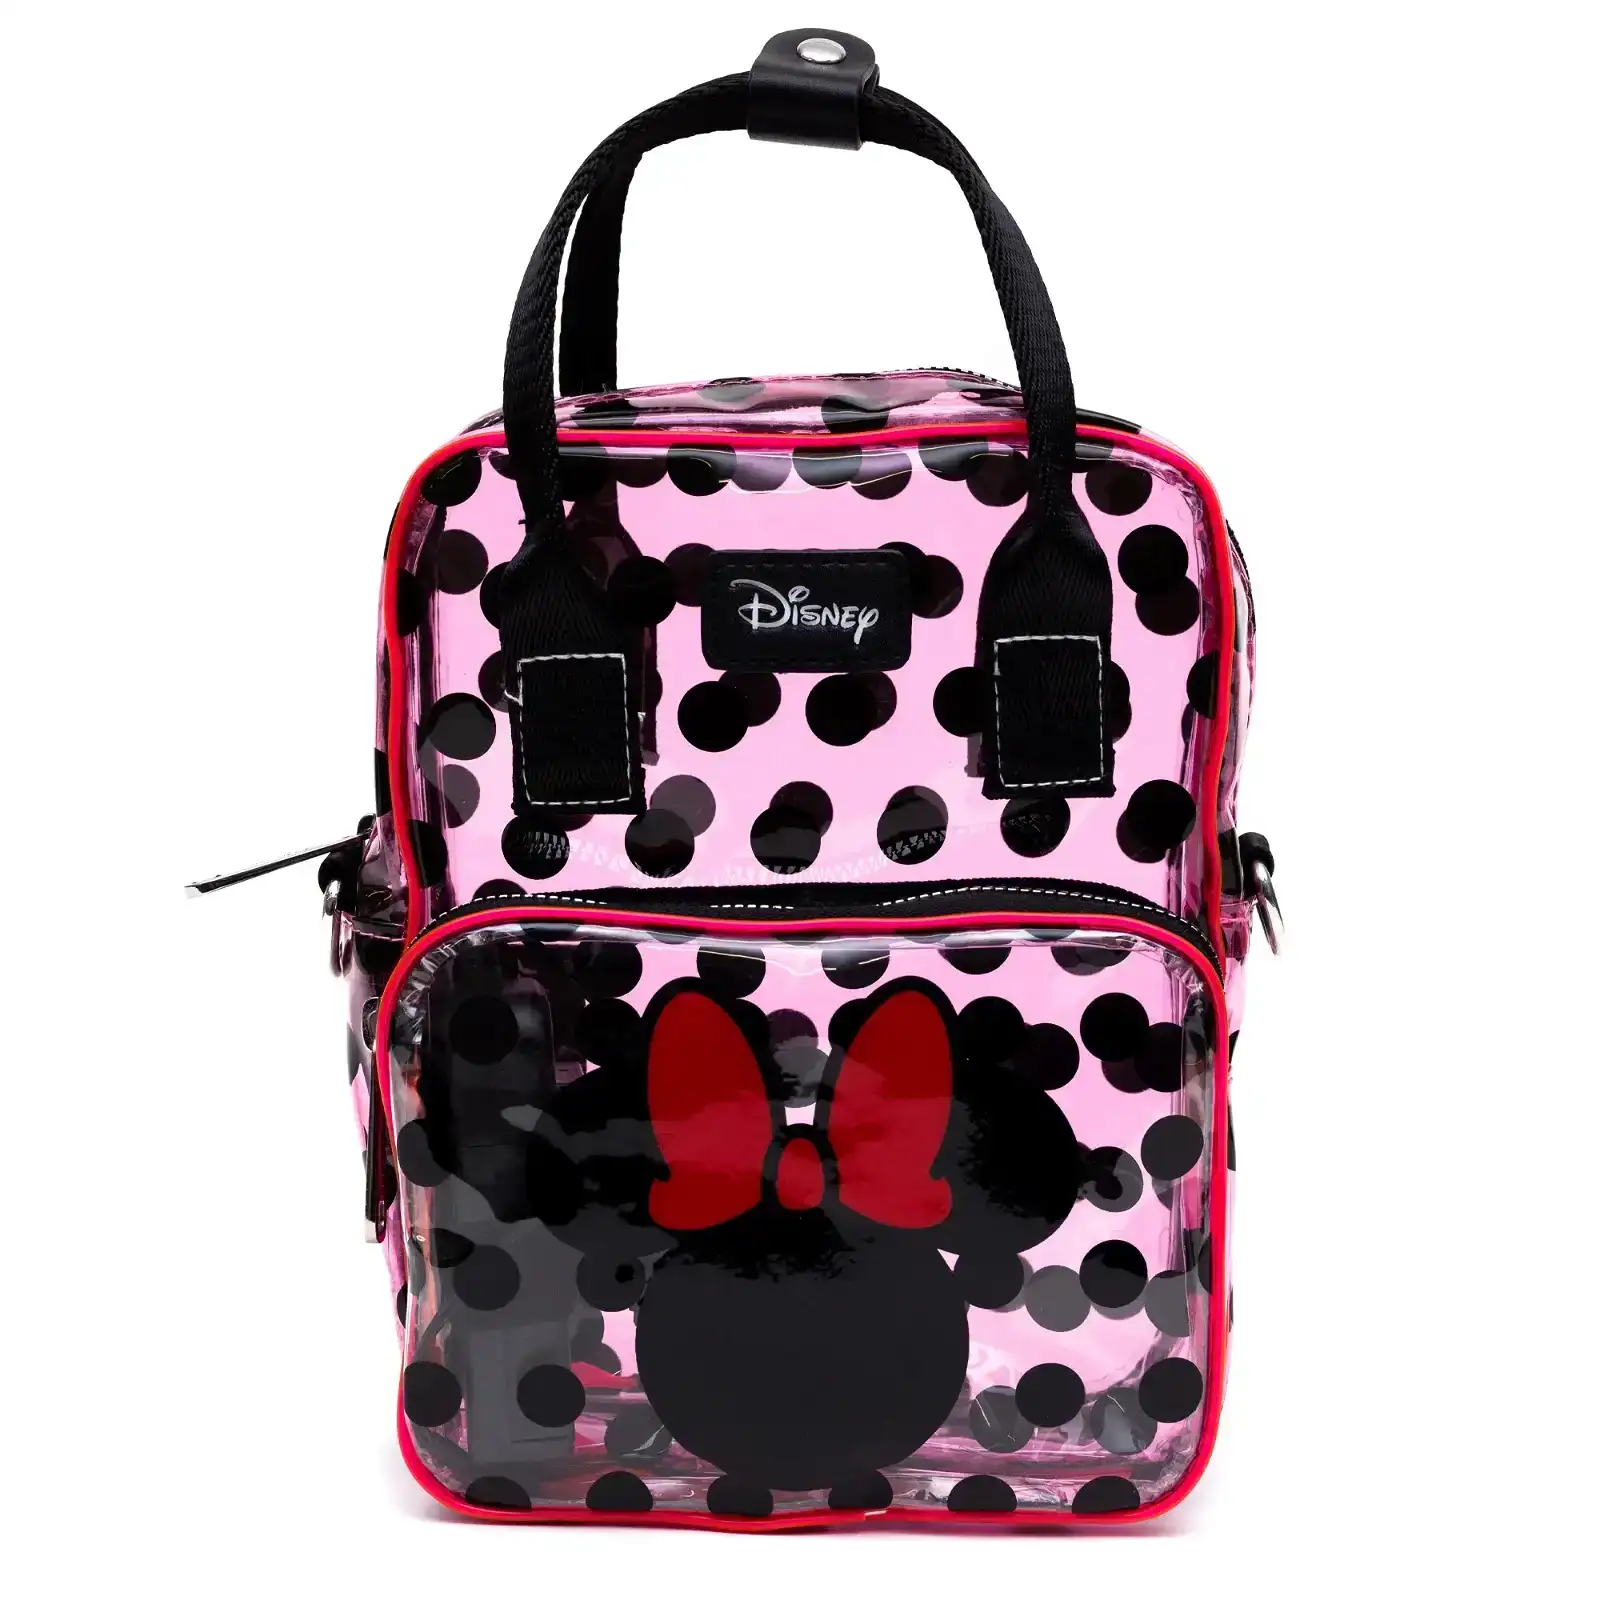 Image of Disney Bag, Cross Body Light Up, Minnie Mouse Ears and Bow Icon with Polka Dots, Transparent, Pink PVC